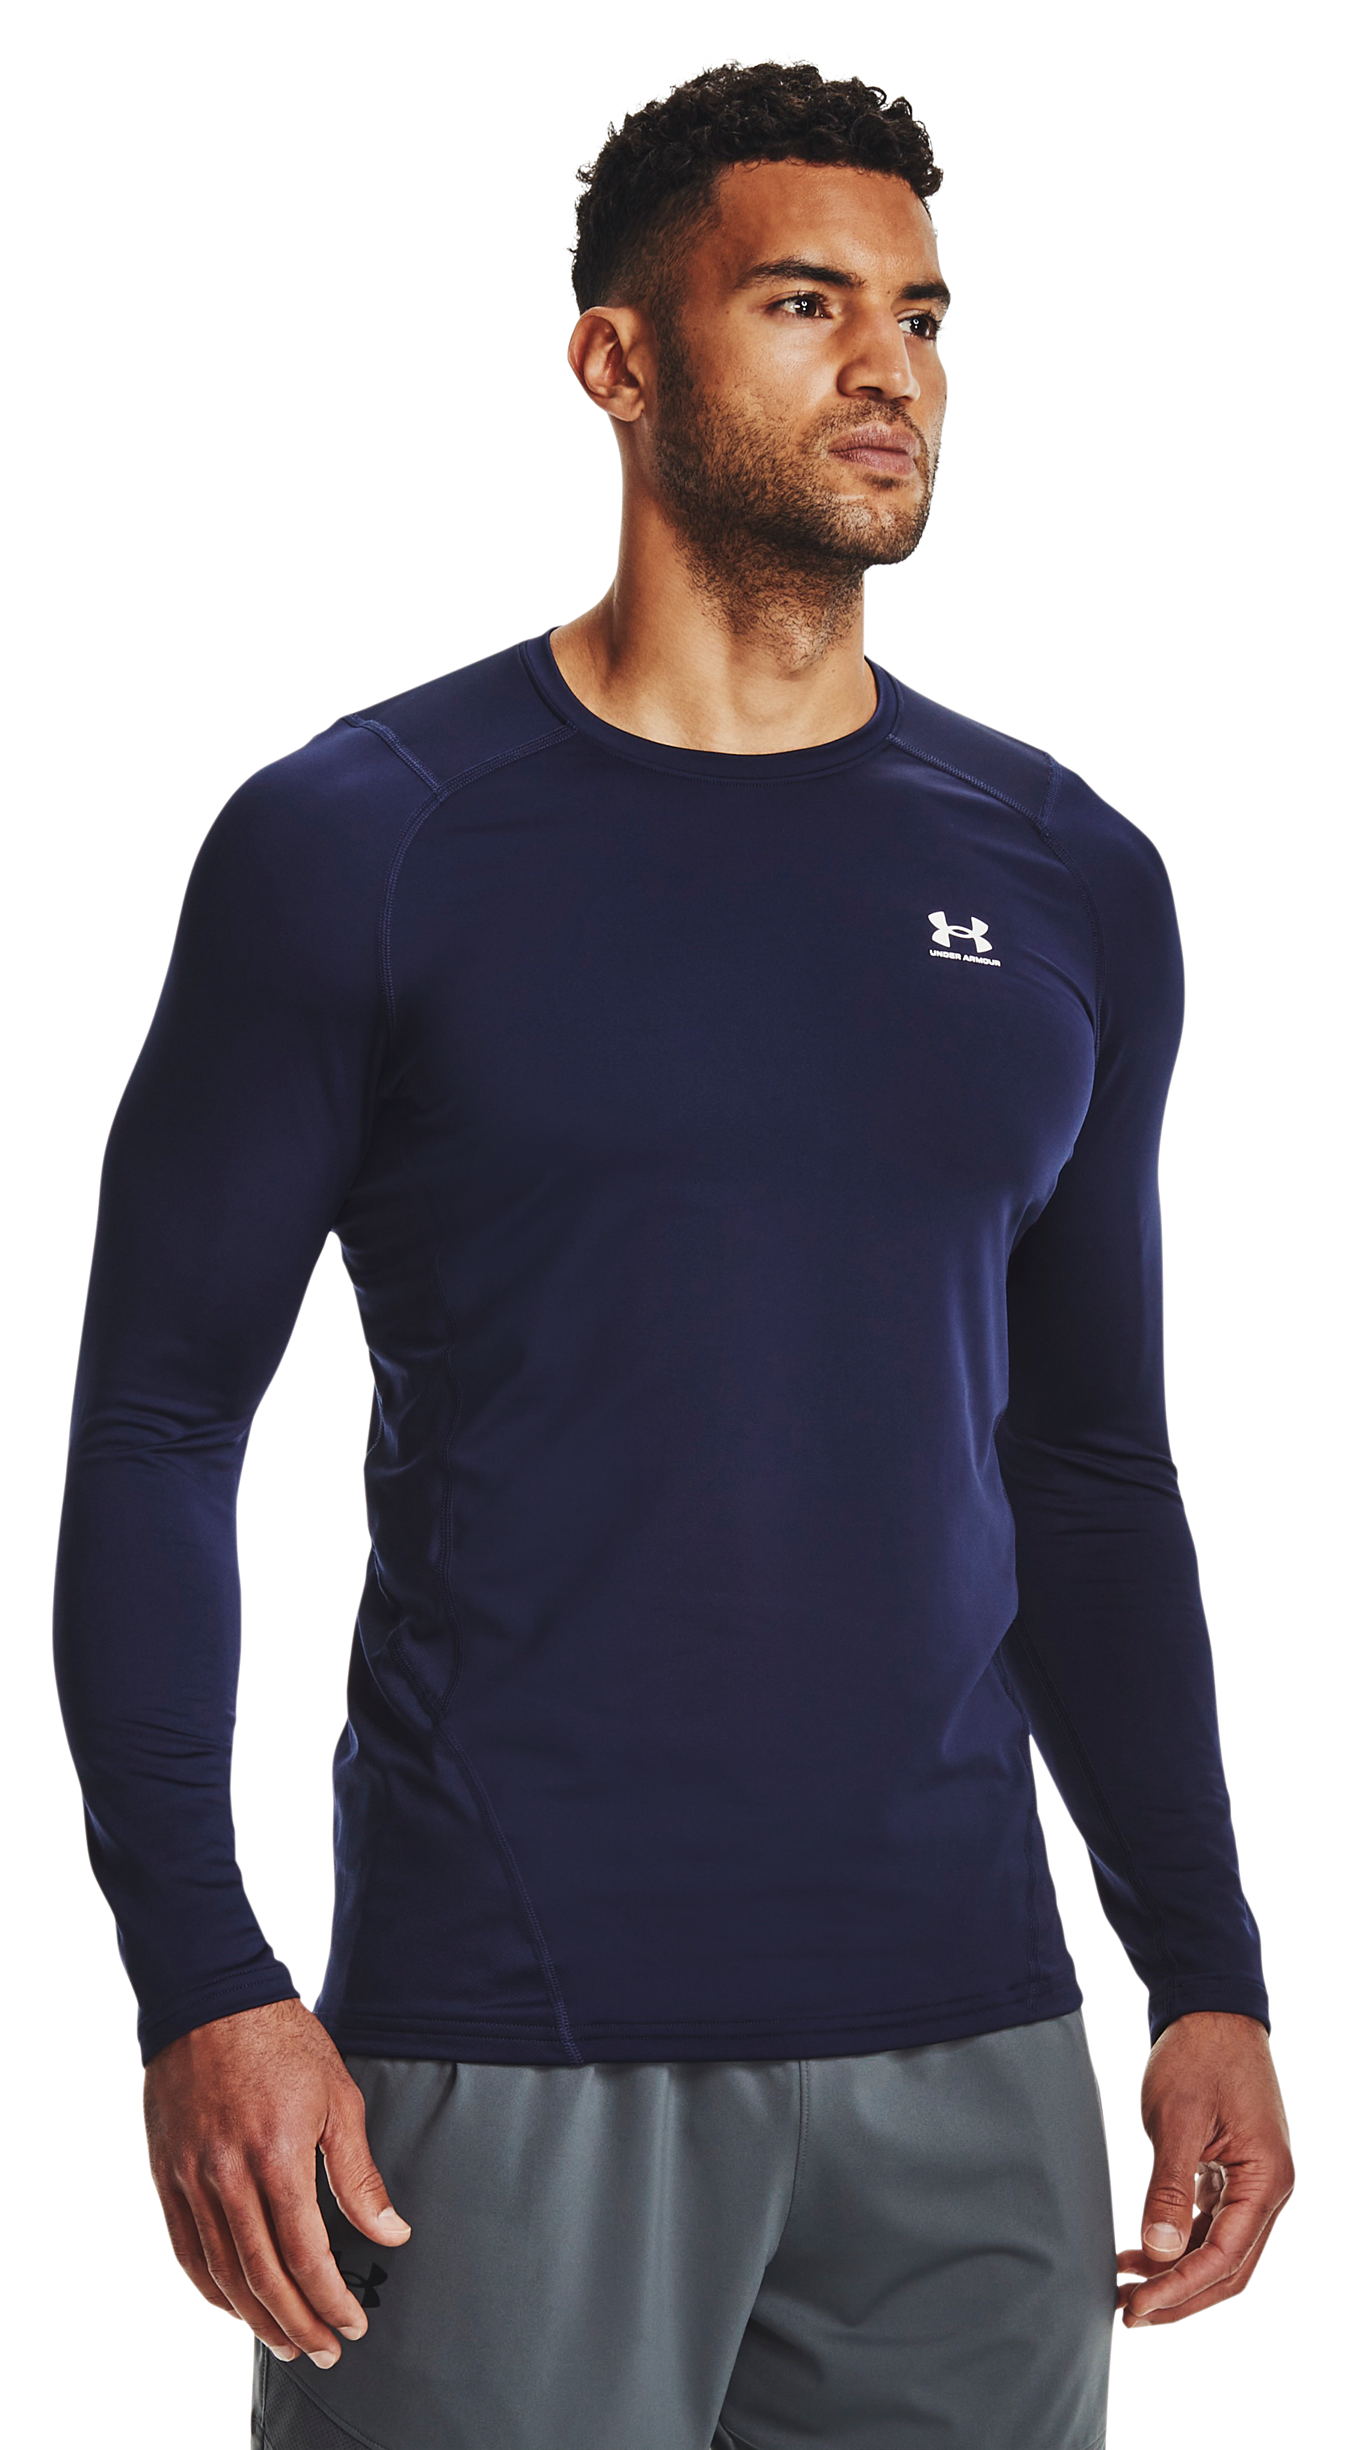 Under Armour ColdGear Fitted Long-Sleeve Crew for Men - Midnight Navy/White - 4XLT